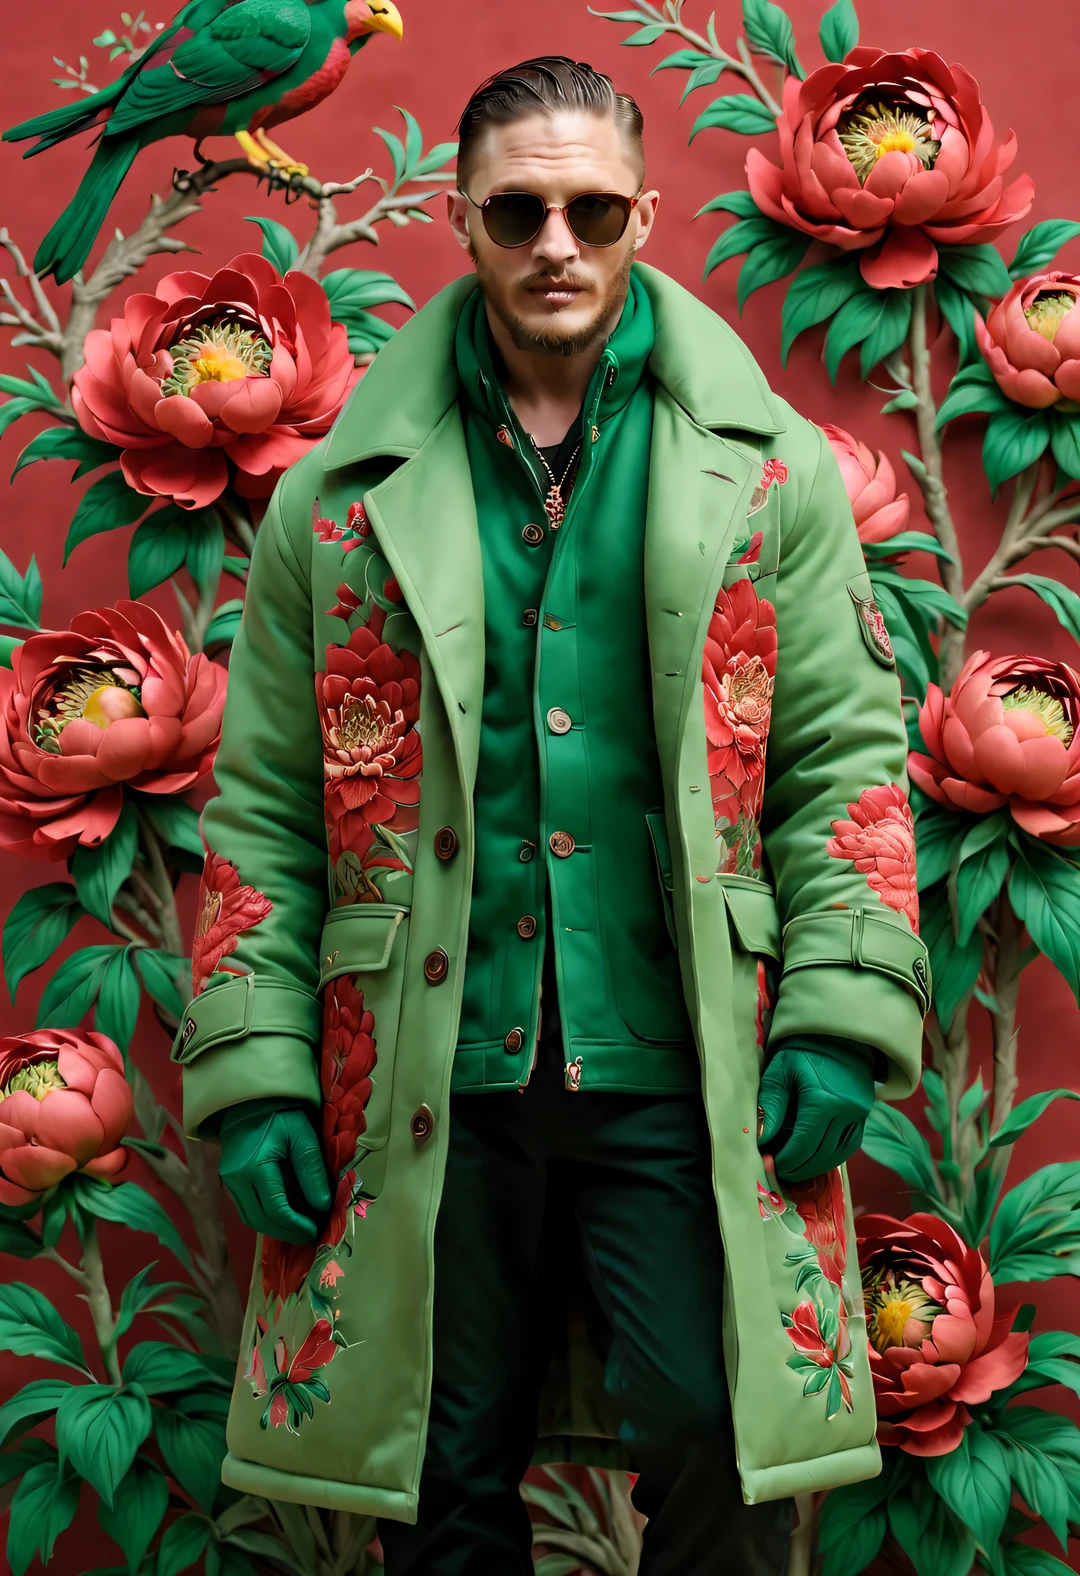 Winter men&#39;s fashion show, (whole body),
(Men's winter exceedsized cotton coat design: 1.0), (Tall and handsome male model Tom Hardy wears a cotton coat made of thick red and green peony fabric: 1.34), Suzhou embroidery large red and green peonies flying birds, The theme of interweaving patterns, With brown fur collar and intricate pattern, A modern interpretation of Tibetan peony and bird totems, Learn from the rich cultural heritage and exquisite craftsmanship of the Northeast region, It reinterprets traditional clothing with modern charm,
Parka snow coat, (exceed) coat, sweater, winter scarf warm scarf, gloves gloves, belt, boots, sunglasses, Wearing a thick cotton coat，red and green peonies,
background blur, Like a movie, With exceptionally clear details, Accent lighting, global illumination, intricate details, Realism, close-up, film camera,